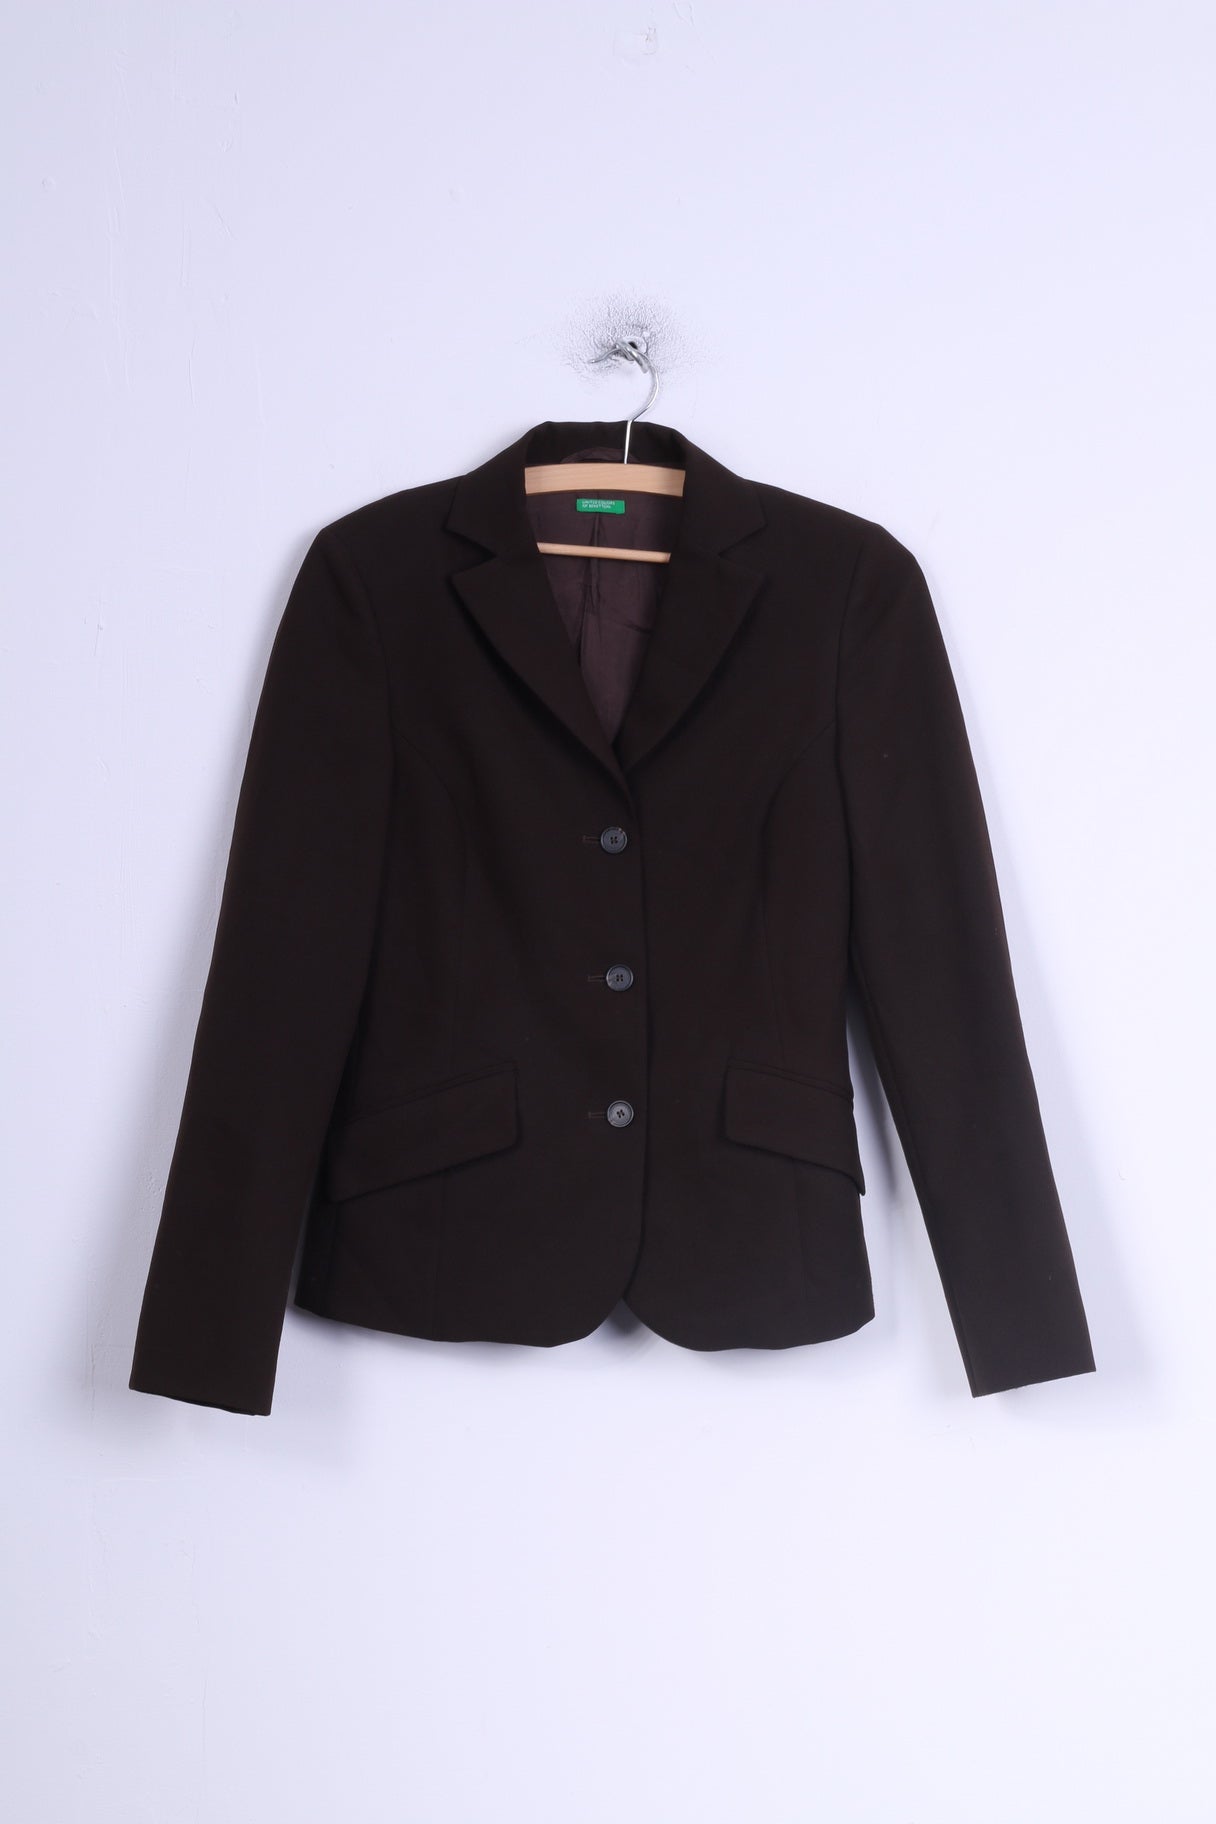 United Colors Of Benetton Womens 40 XS Jacket Brown Single Breasted Blazer